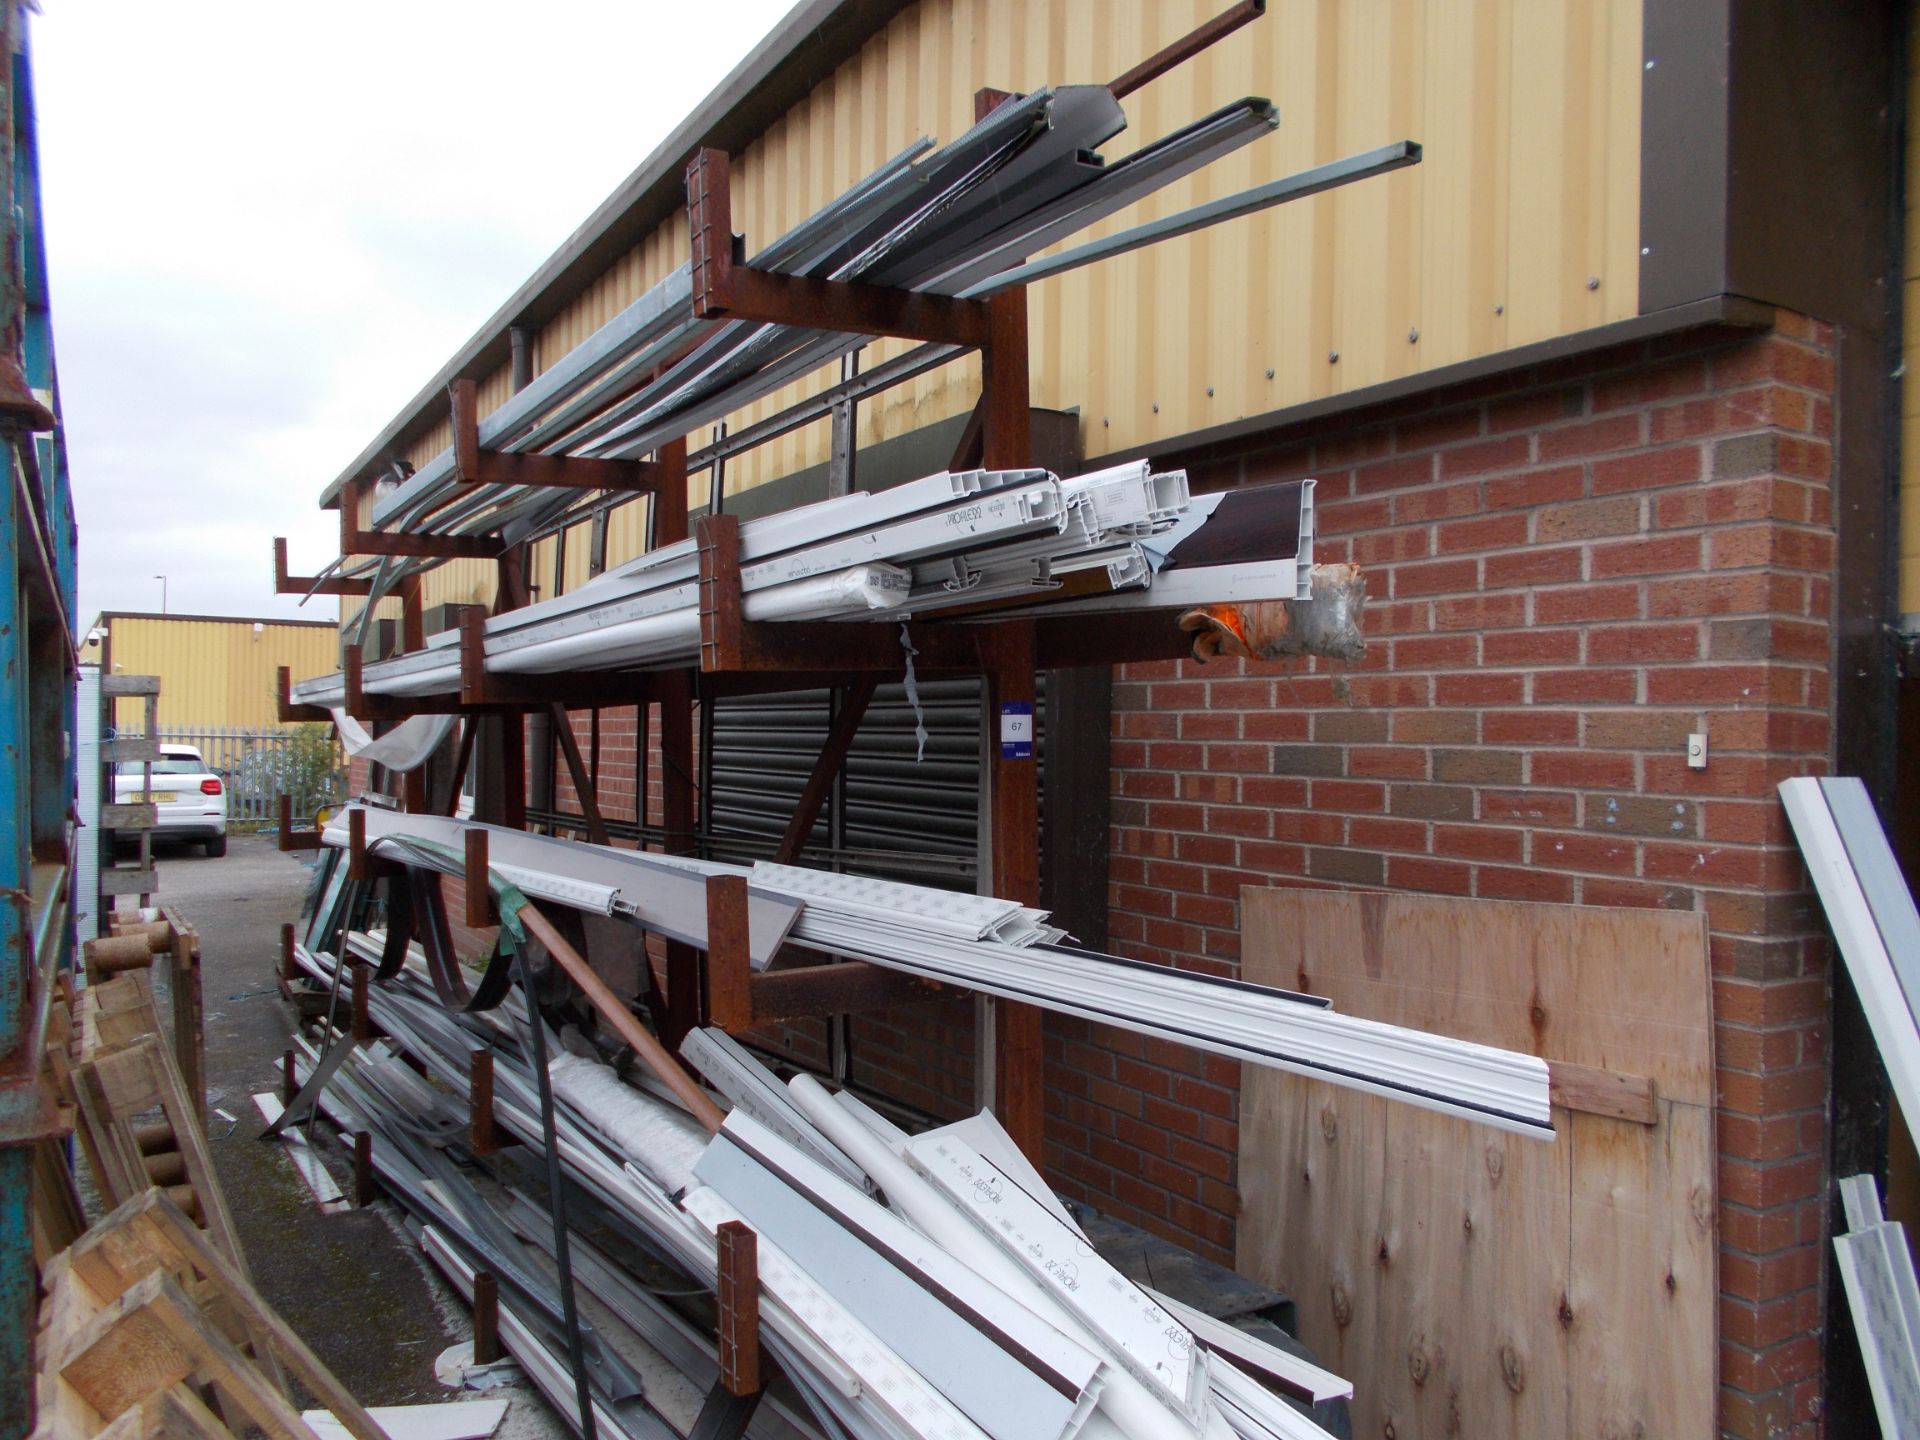 Steel fabricated cantilever rack and contents